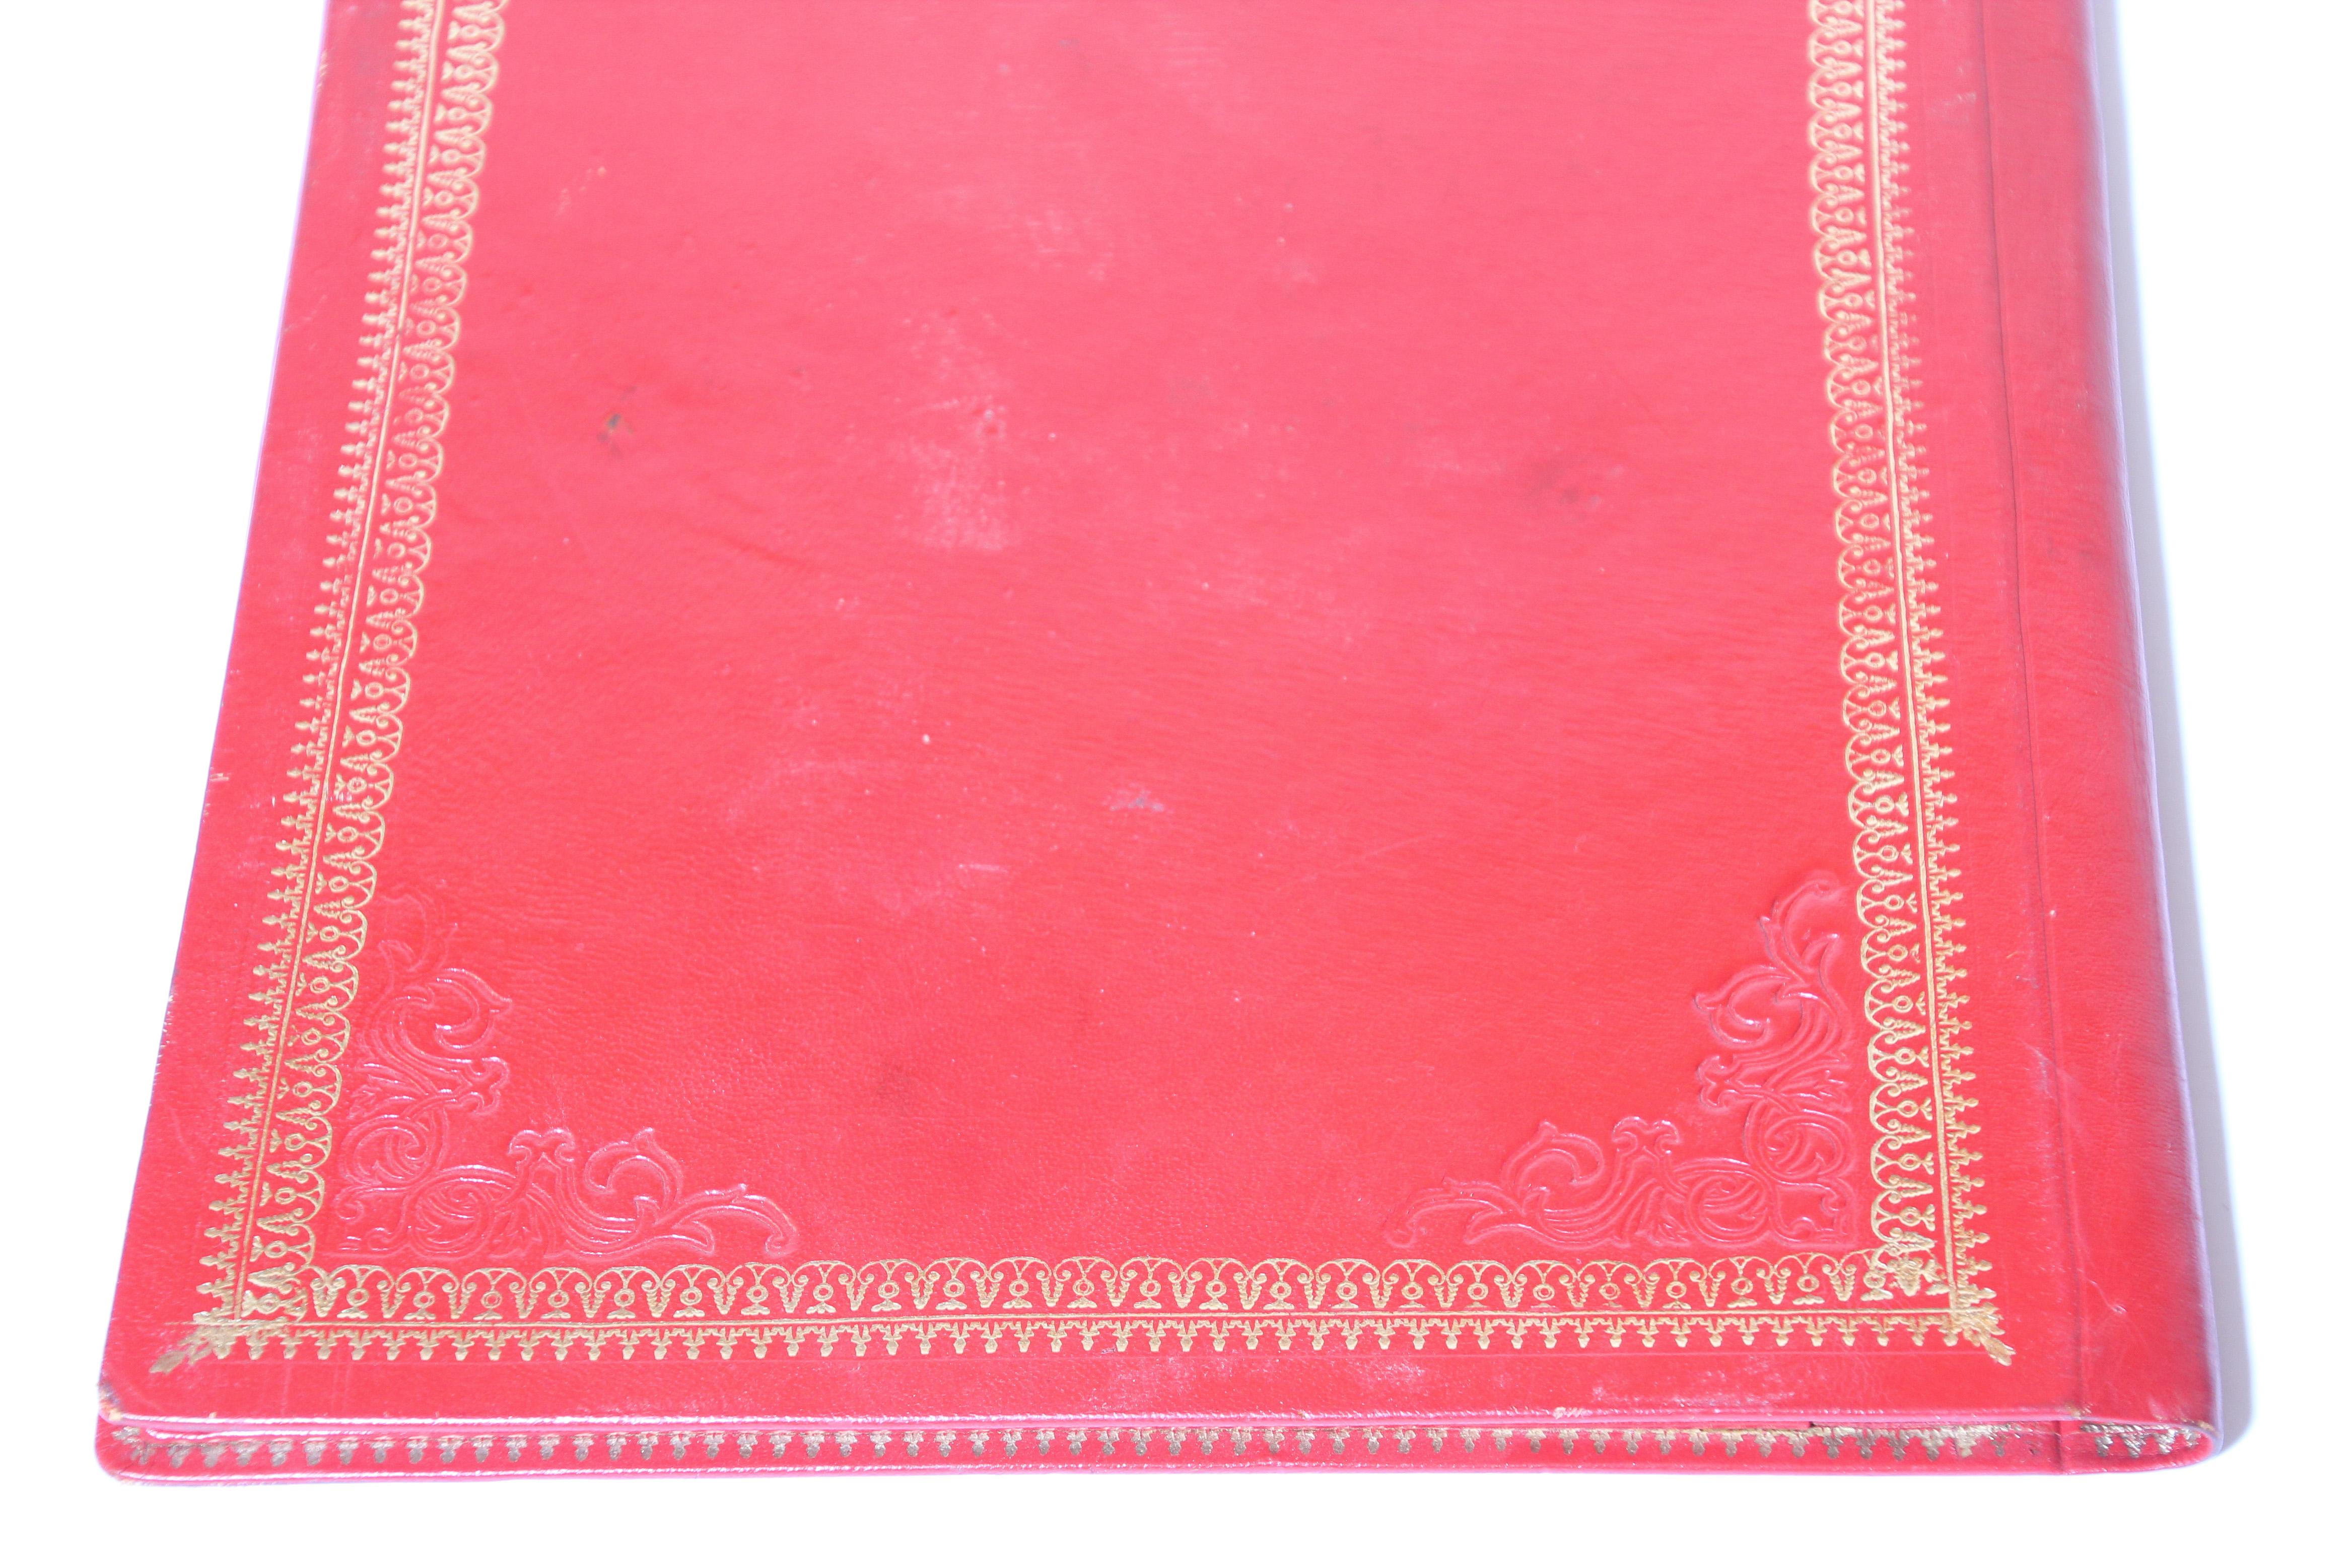 Vintage Moroccan Embossed Leather Padfolio For Sale 1